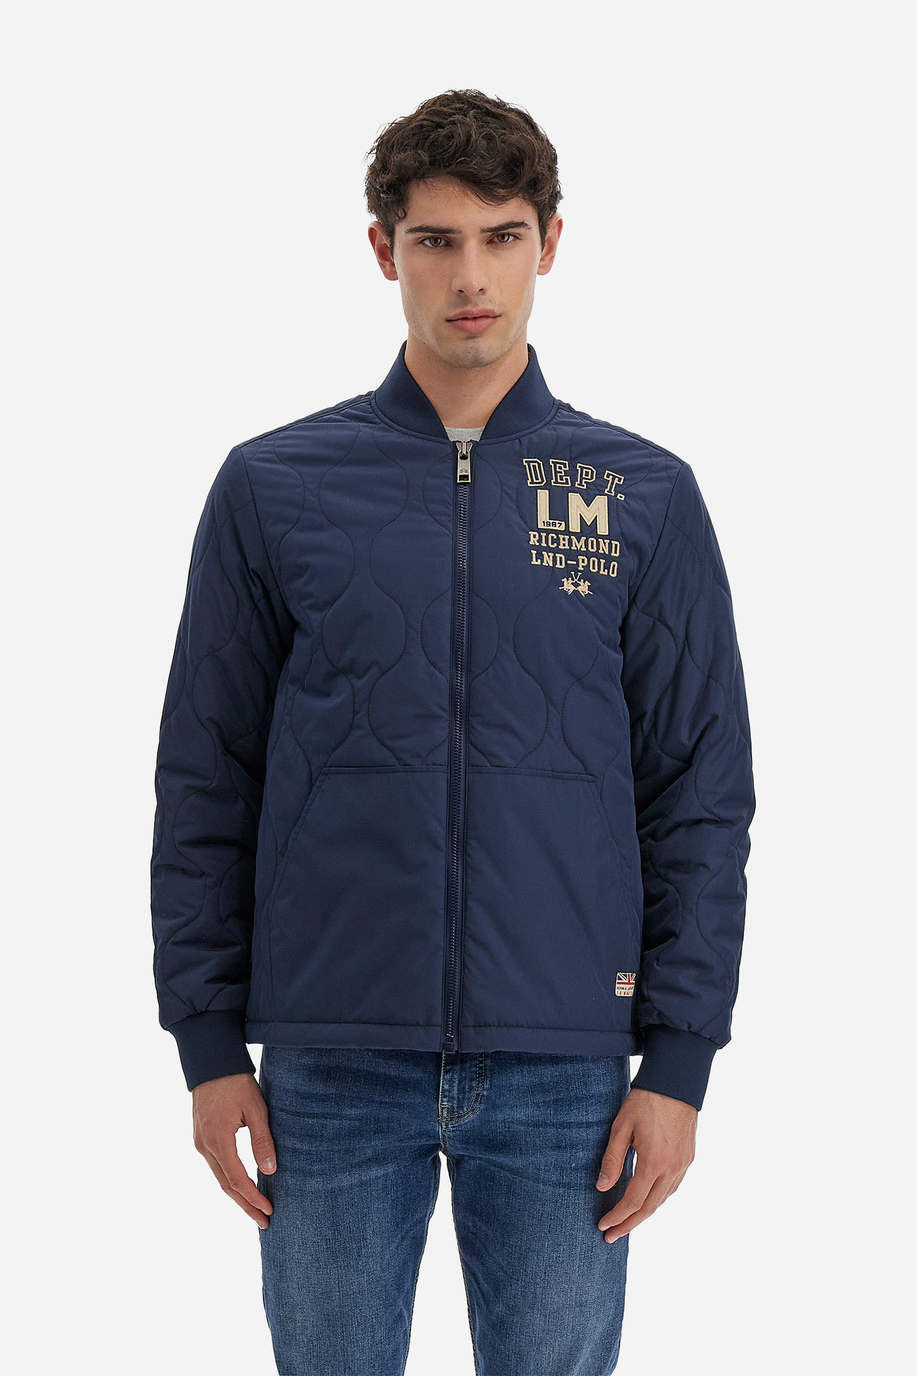 Polo Academy men's solid color high neck full zip jacket with hidden pockets - Vanni - Polo Academy | La Martina - Official Online Shop